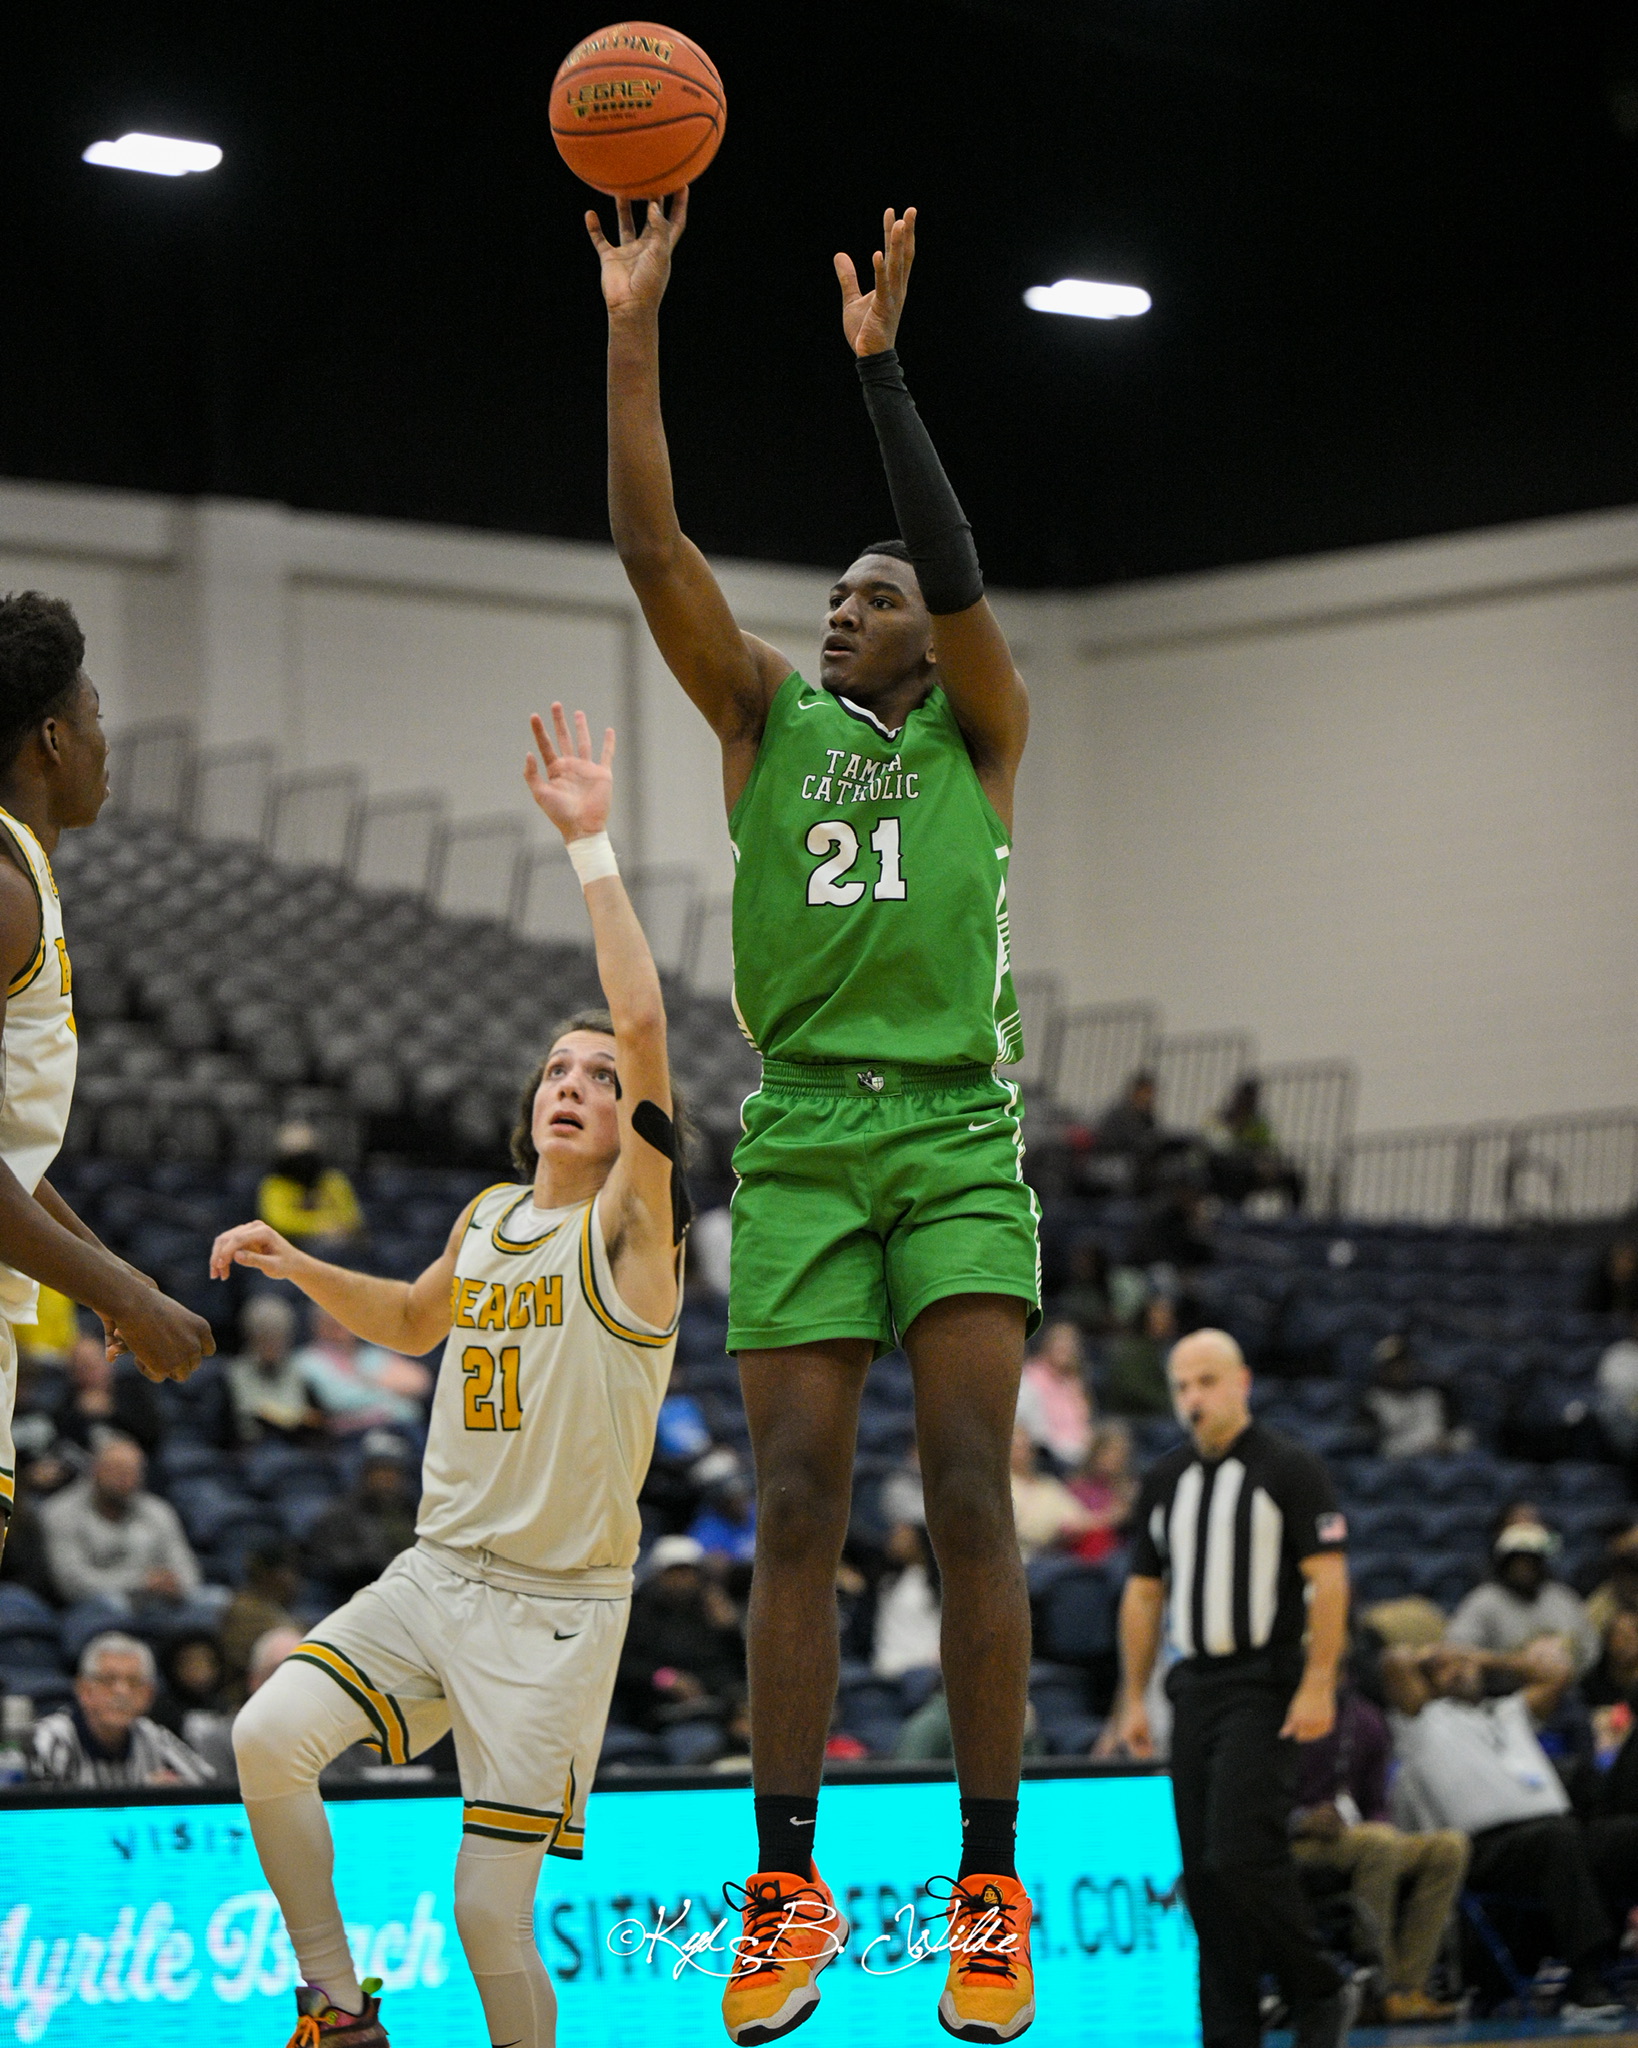 Tampa Catholic (FL) Downs Myrtle Beach 88-51 in Game 2 of Beachball Classic